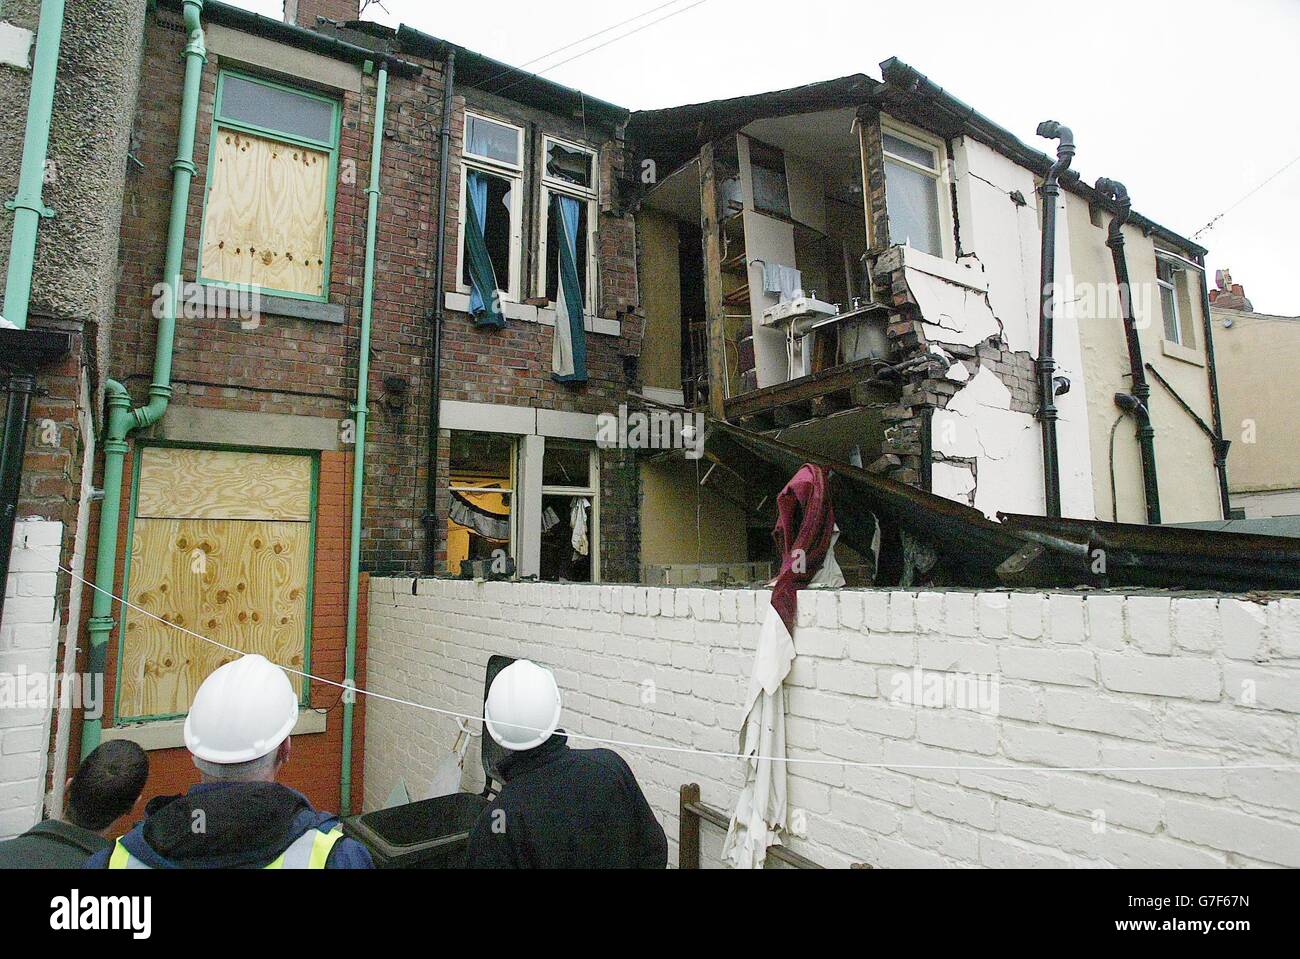 A 93-year-old woman was burned in a gas explosion which destroyed her home, a fire brigade spokeswoman said today. The pensioner suffered head injuries and burns to her face, legs and arms in the huge blast at her home in Sackville Road, Heaton, Newcastle. Workmen look at the scene in Newcastle. Stock Photo